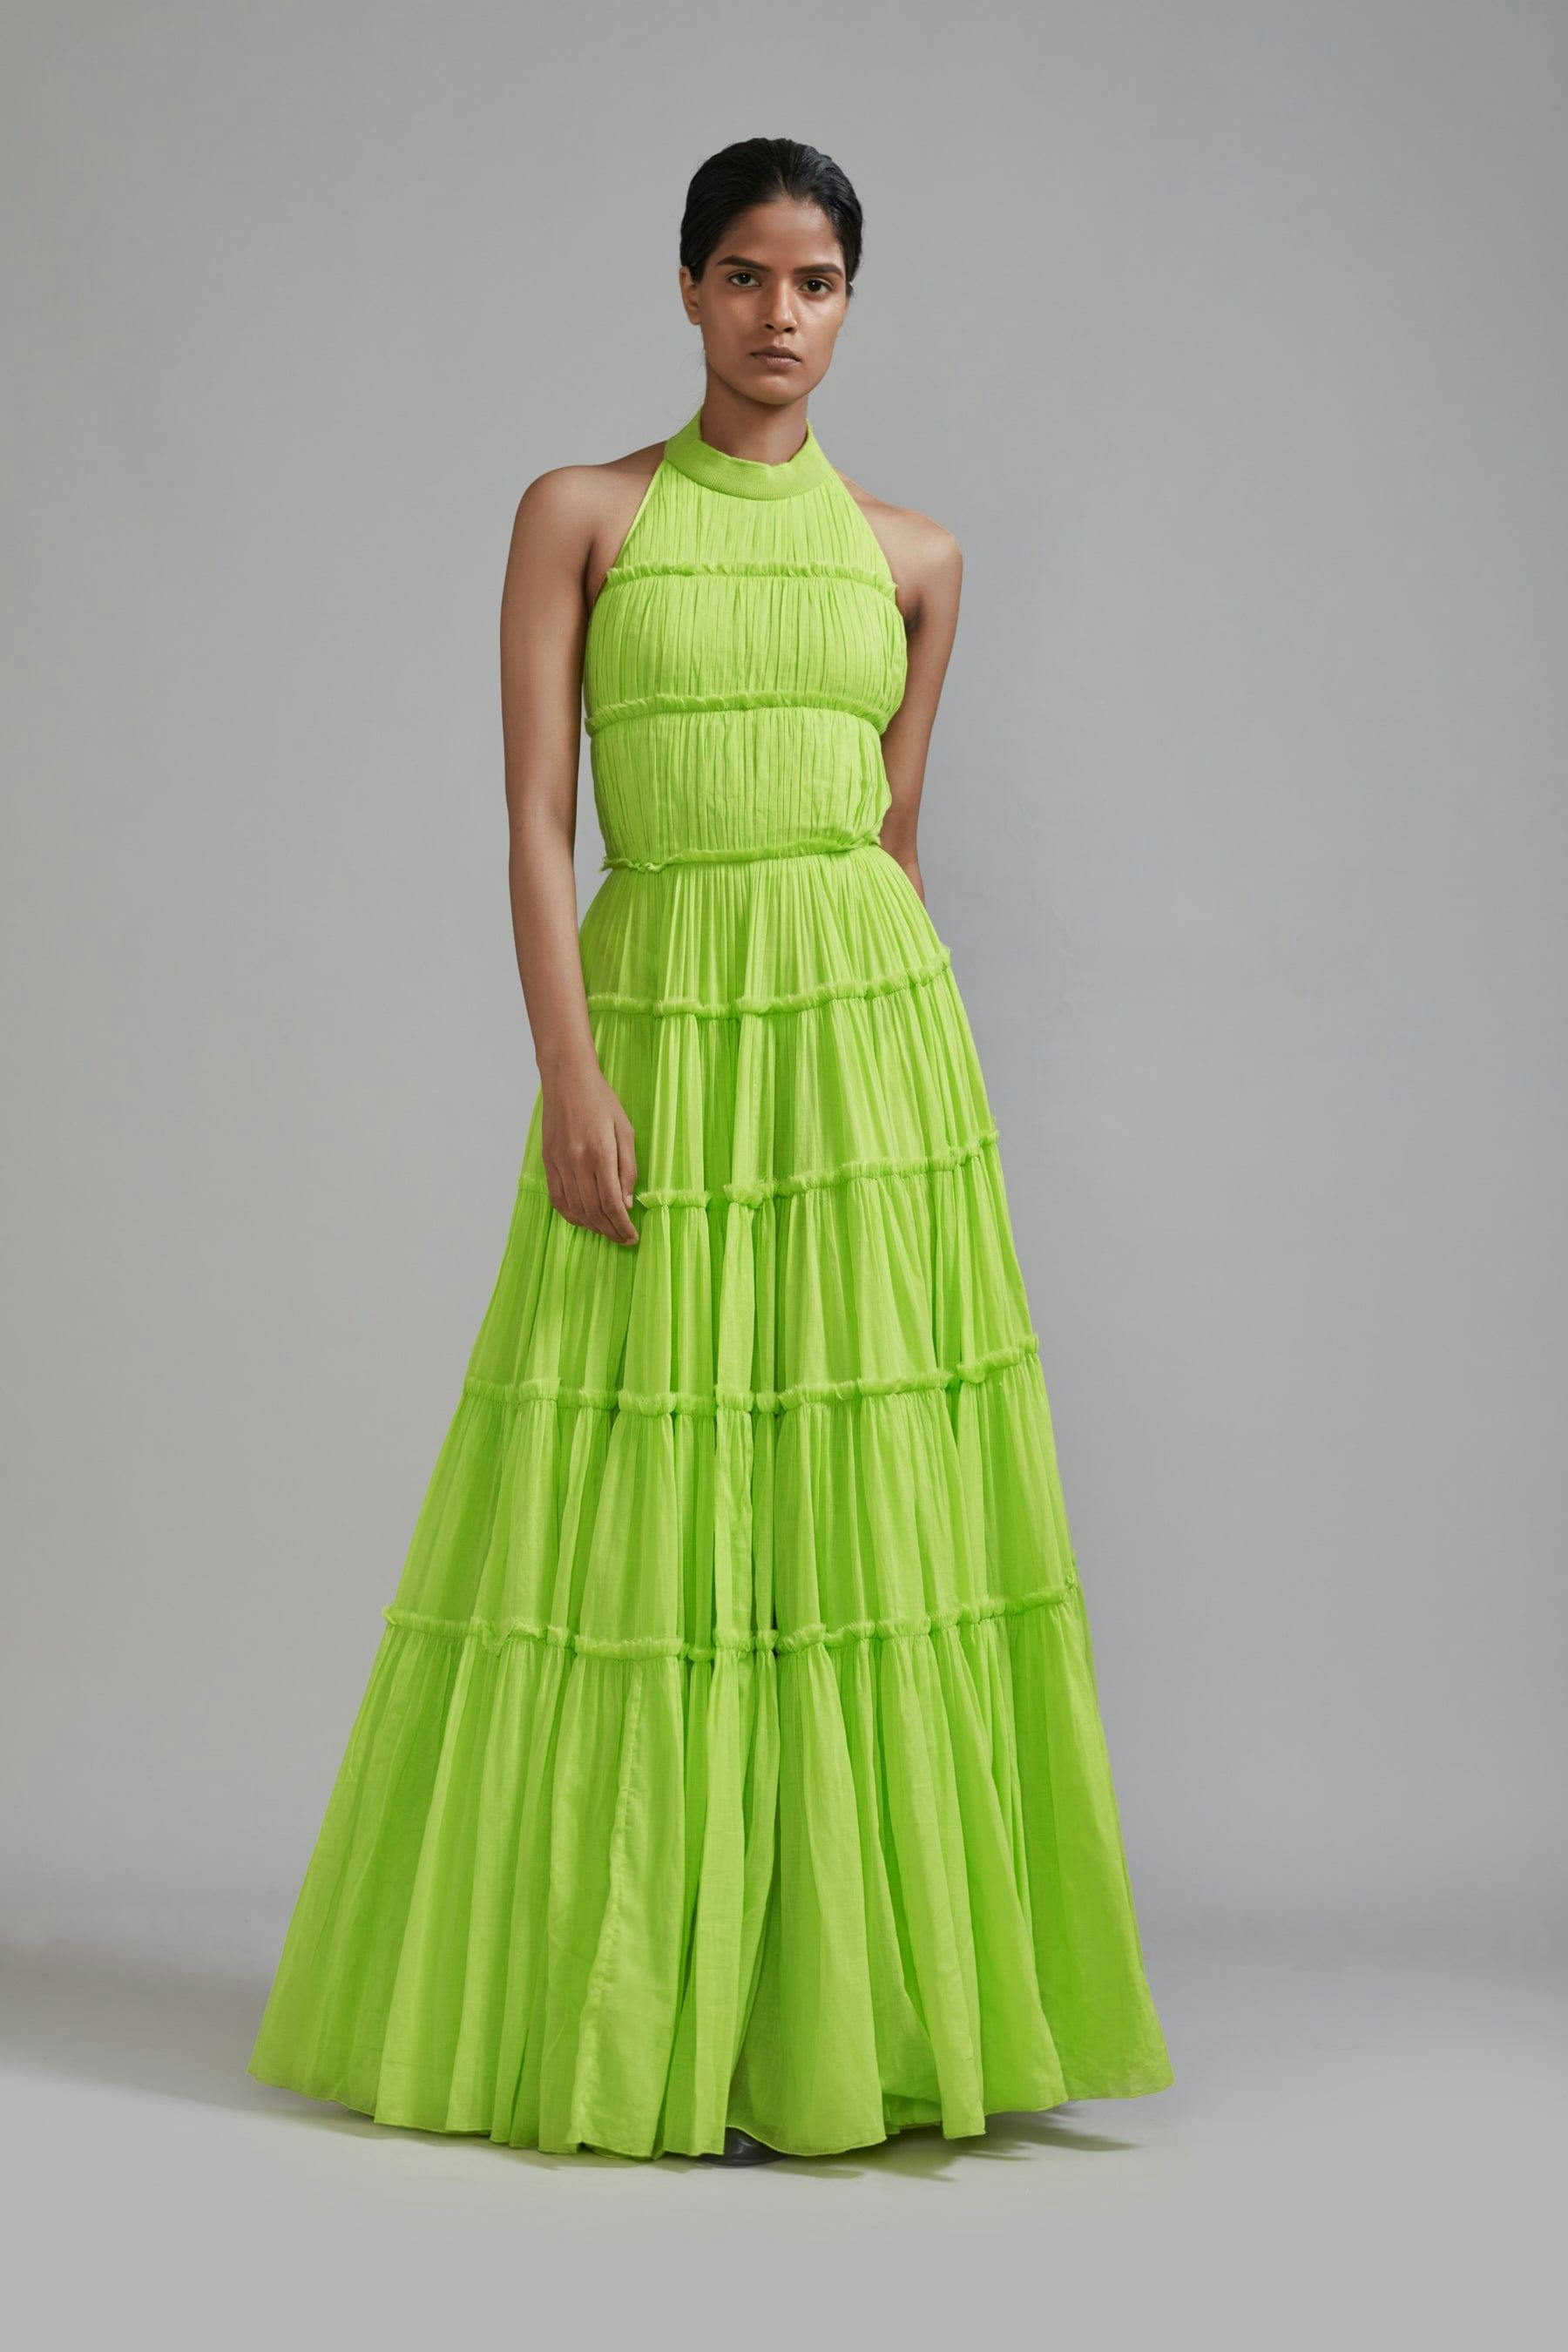 Neon Green Backless Tiered Gown, a product by Style Mati